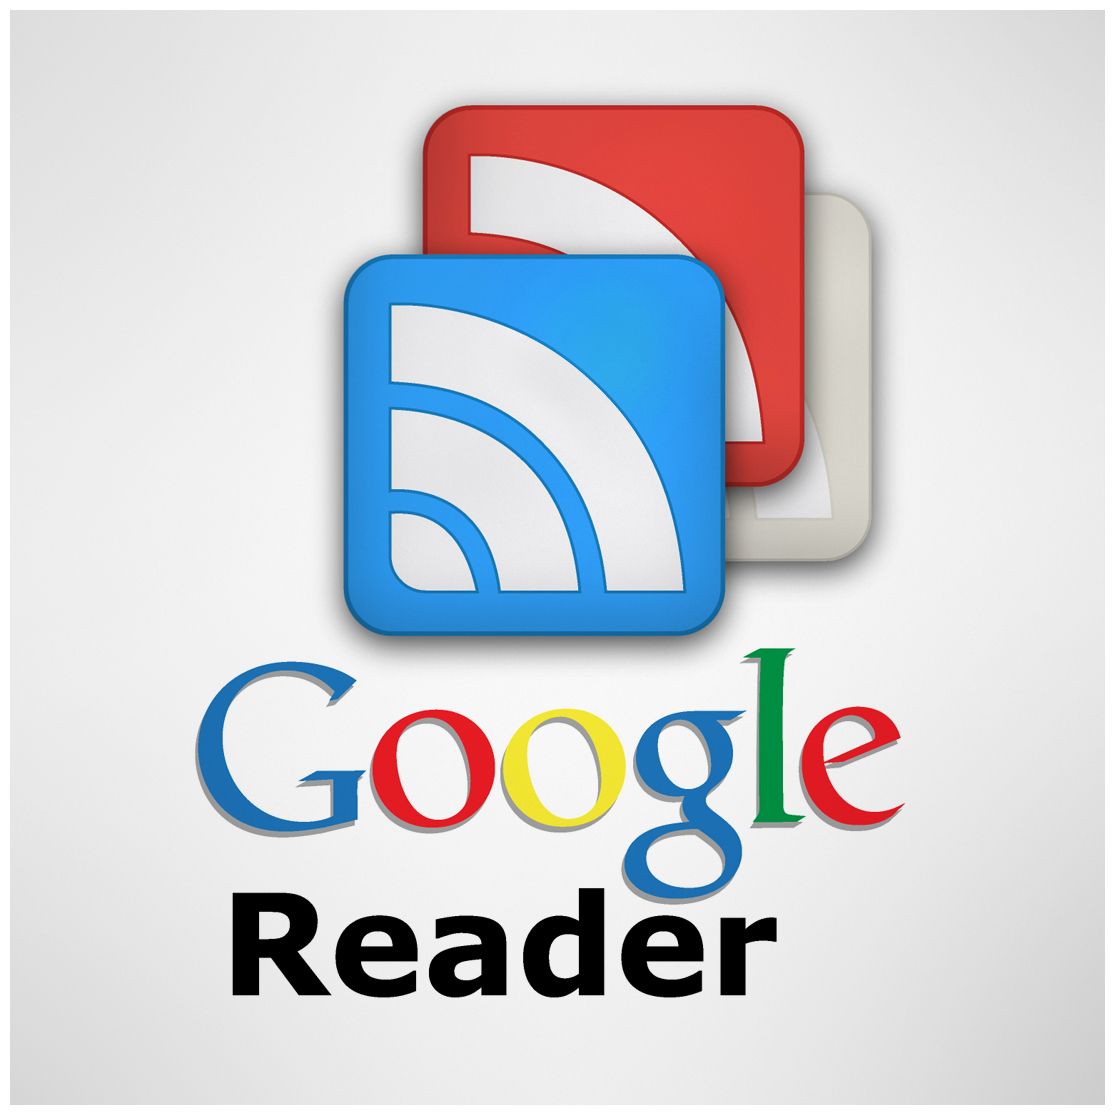 The End of the Google Reader